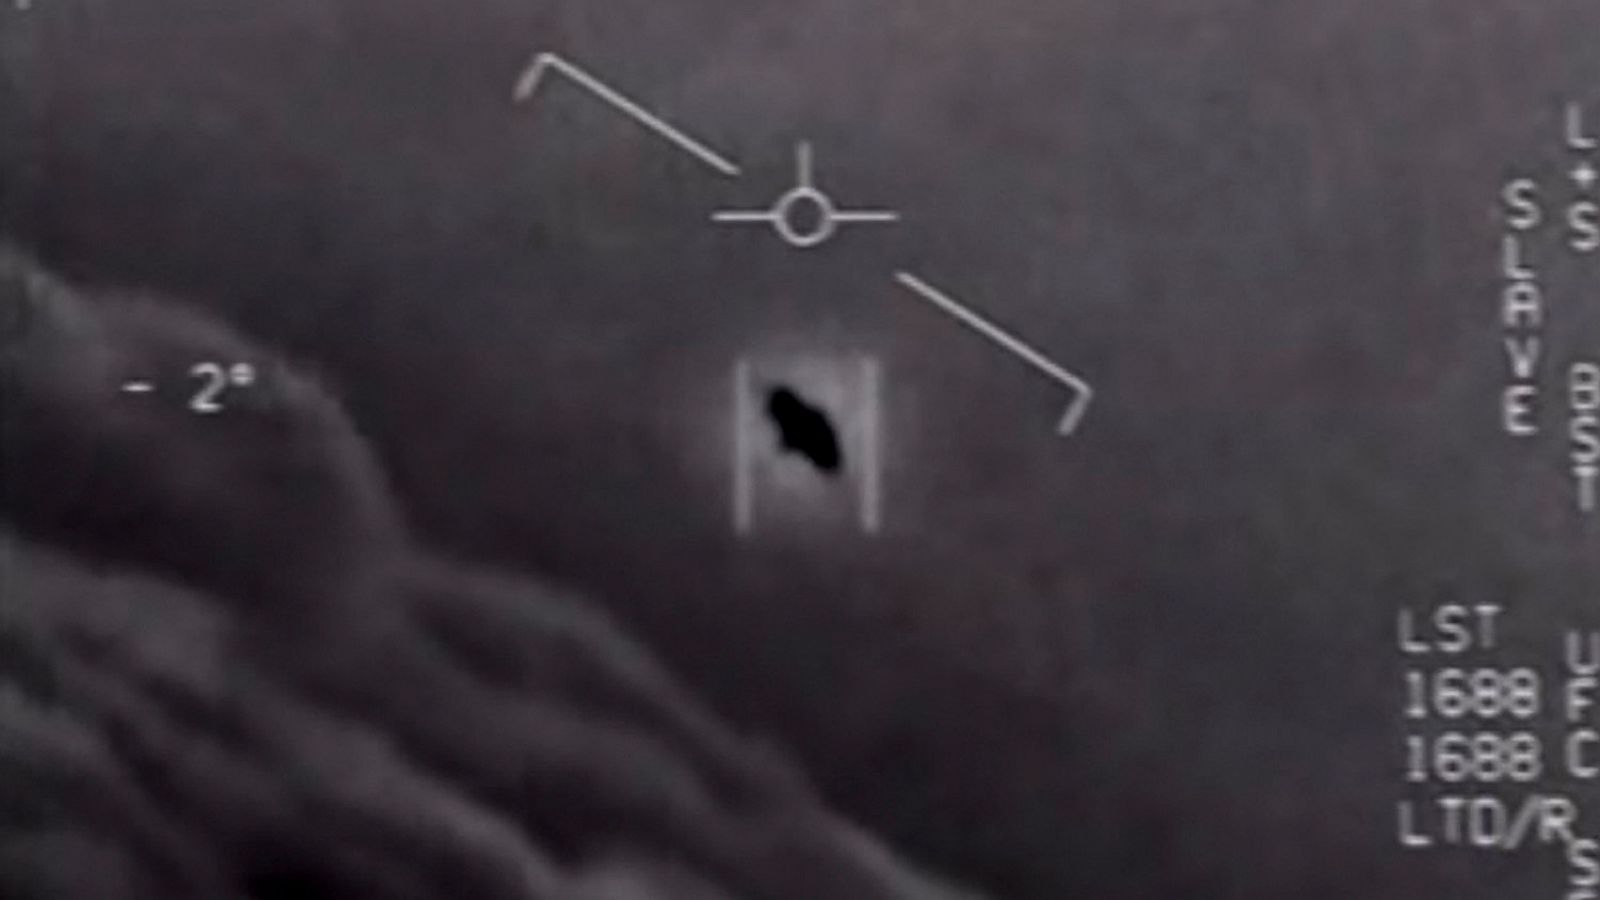 Pentagon launches website for declassified UFO info and images.